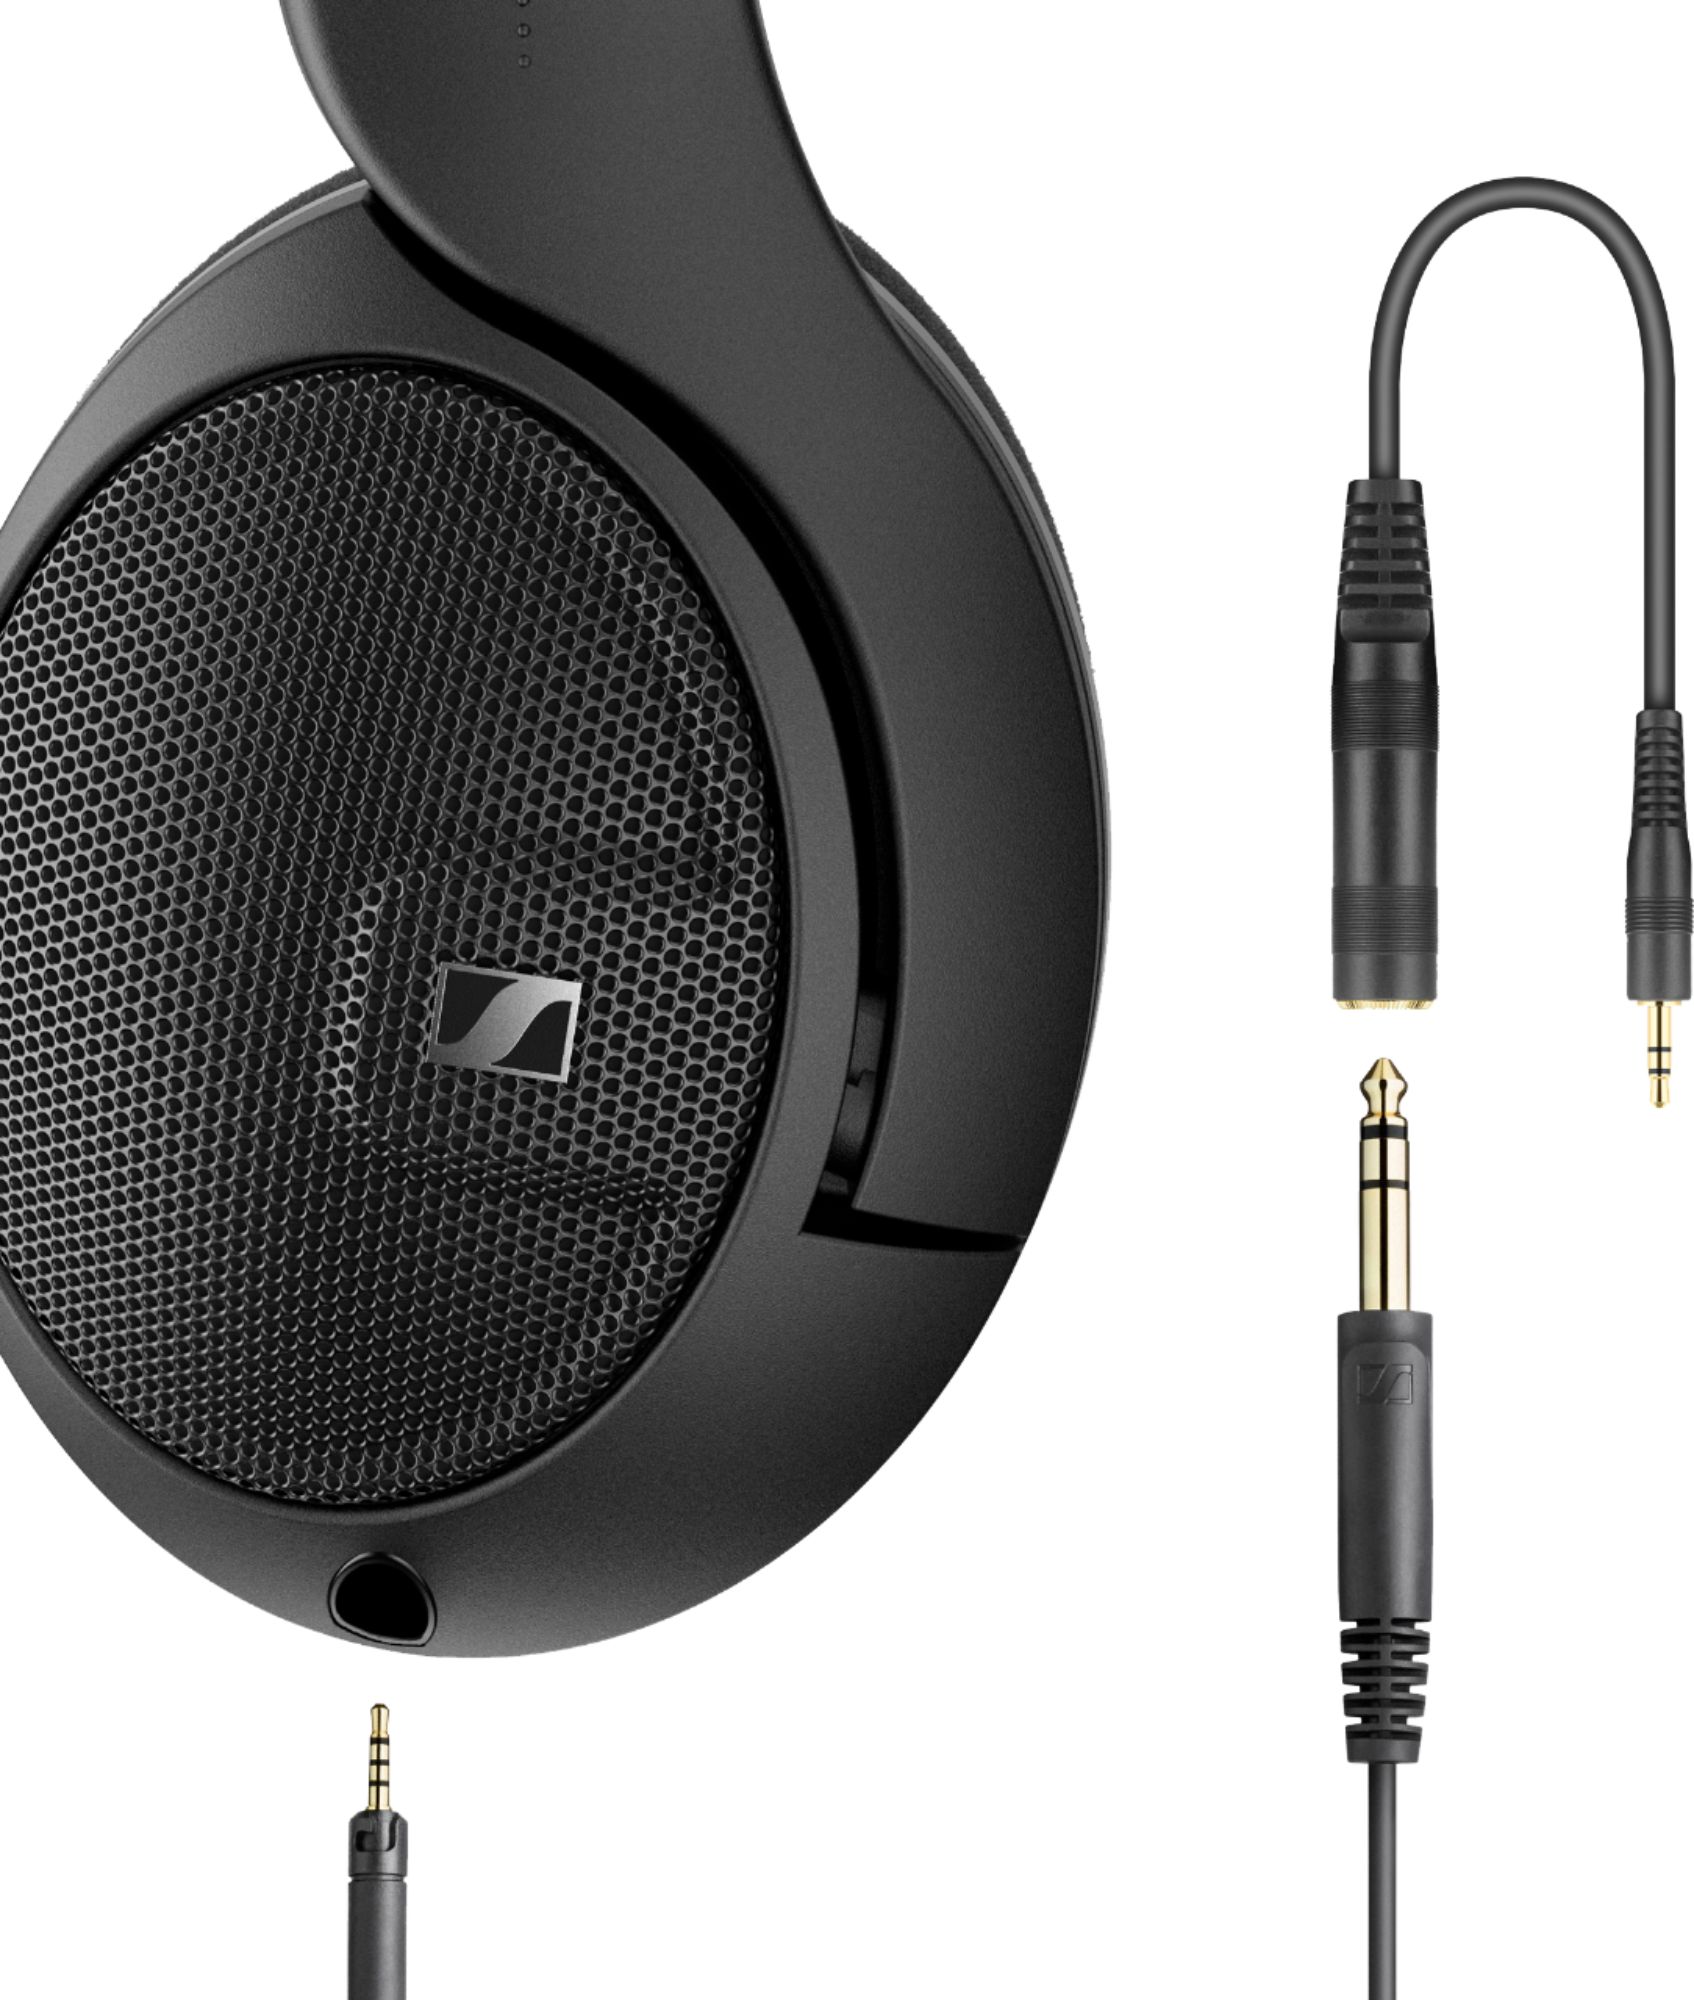 Sennheiser HD 560S - Reveal the truth in your music